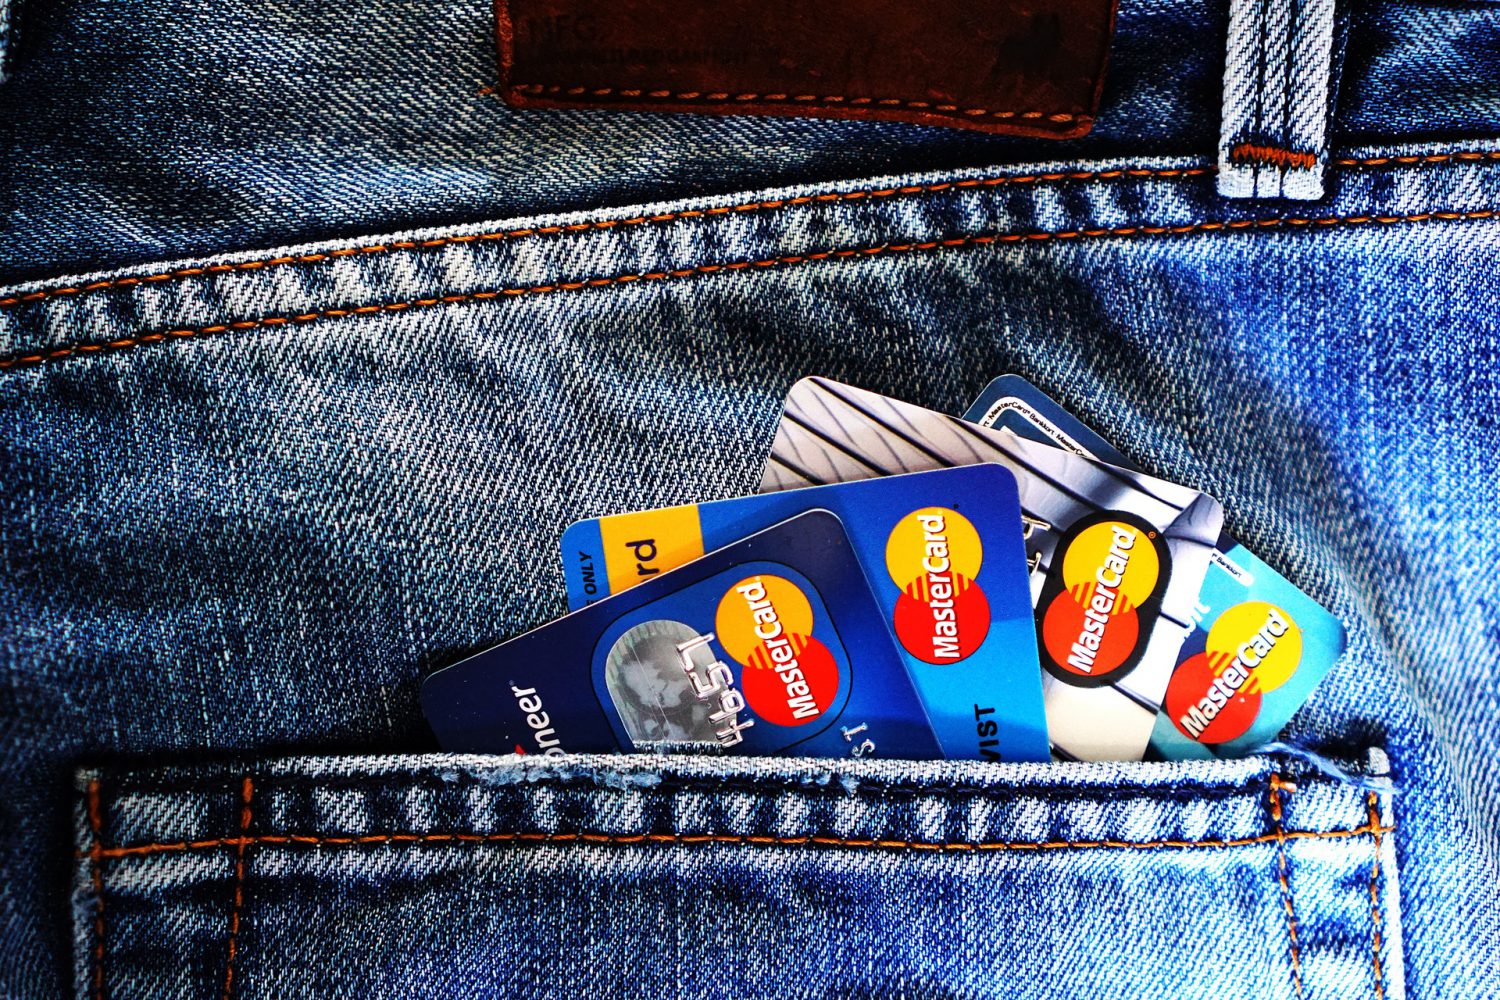 Why you should be using a credit card instead of a debit card